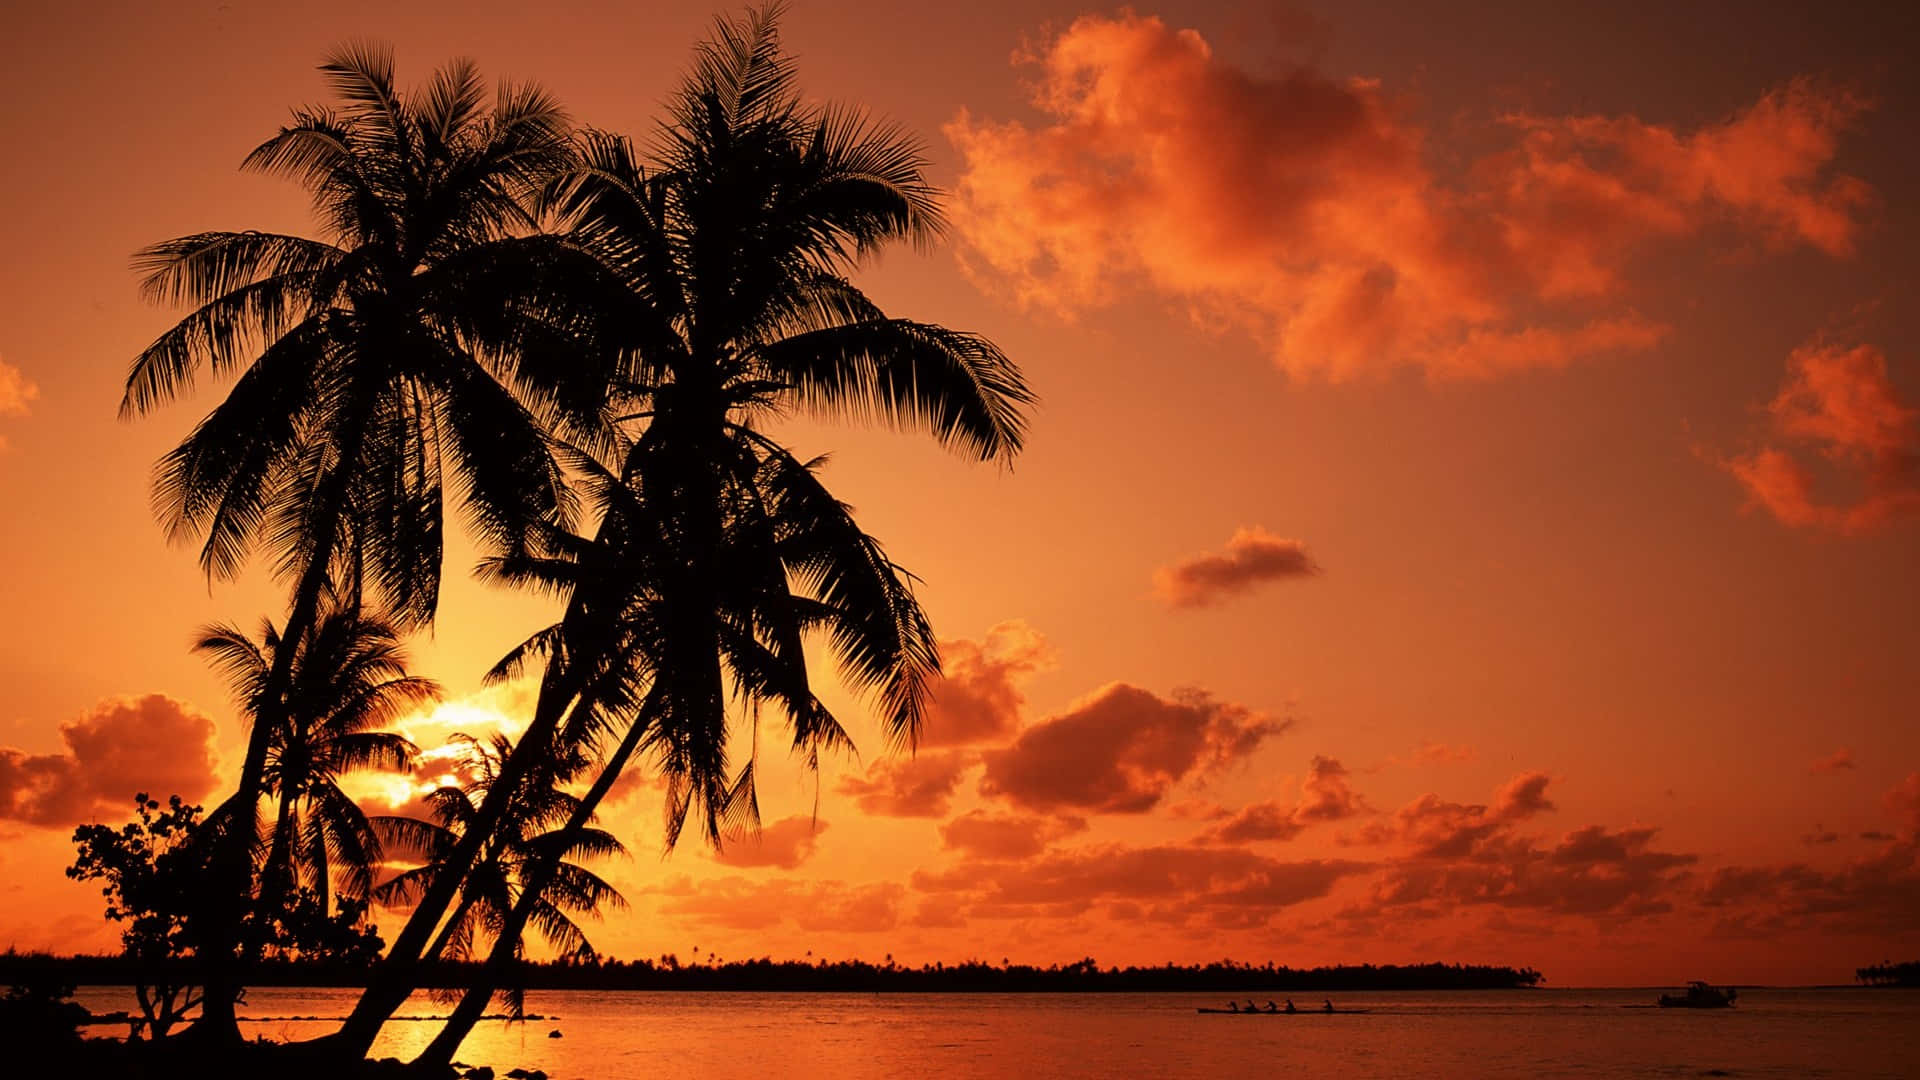 A beach with a beautiful palm tree to relax Wallpaper